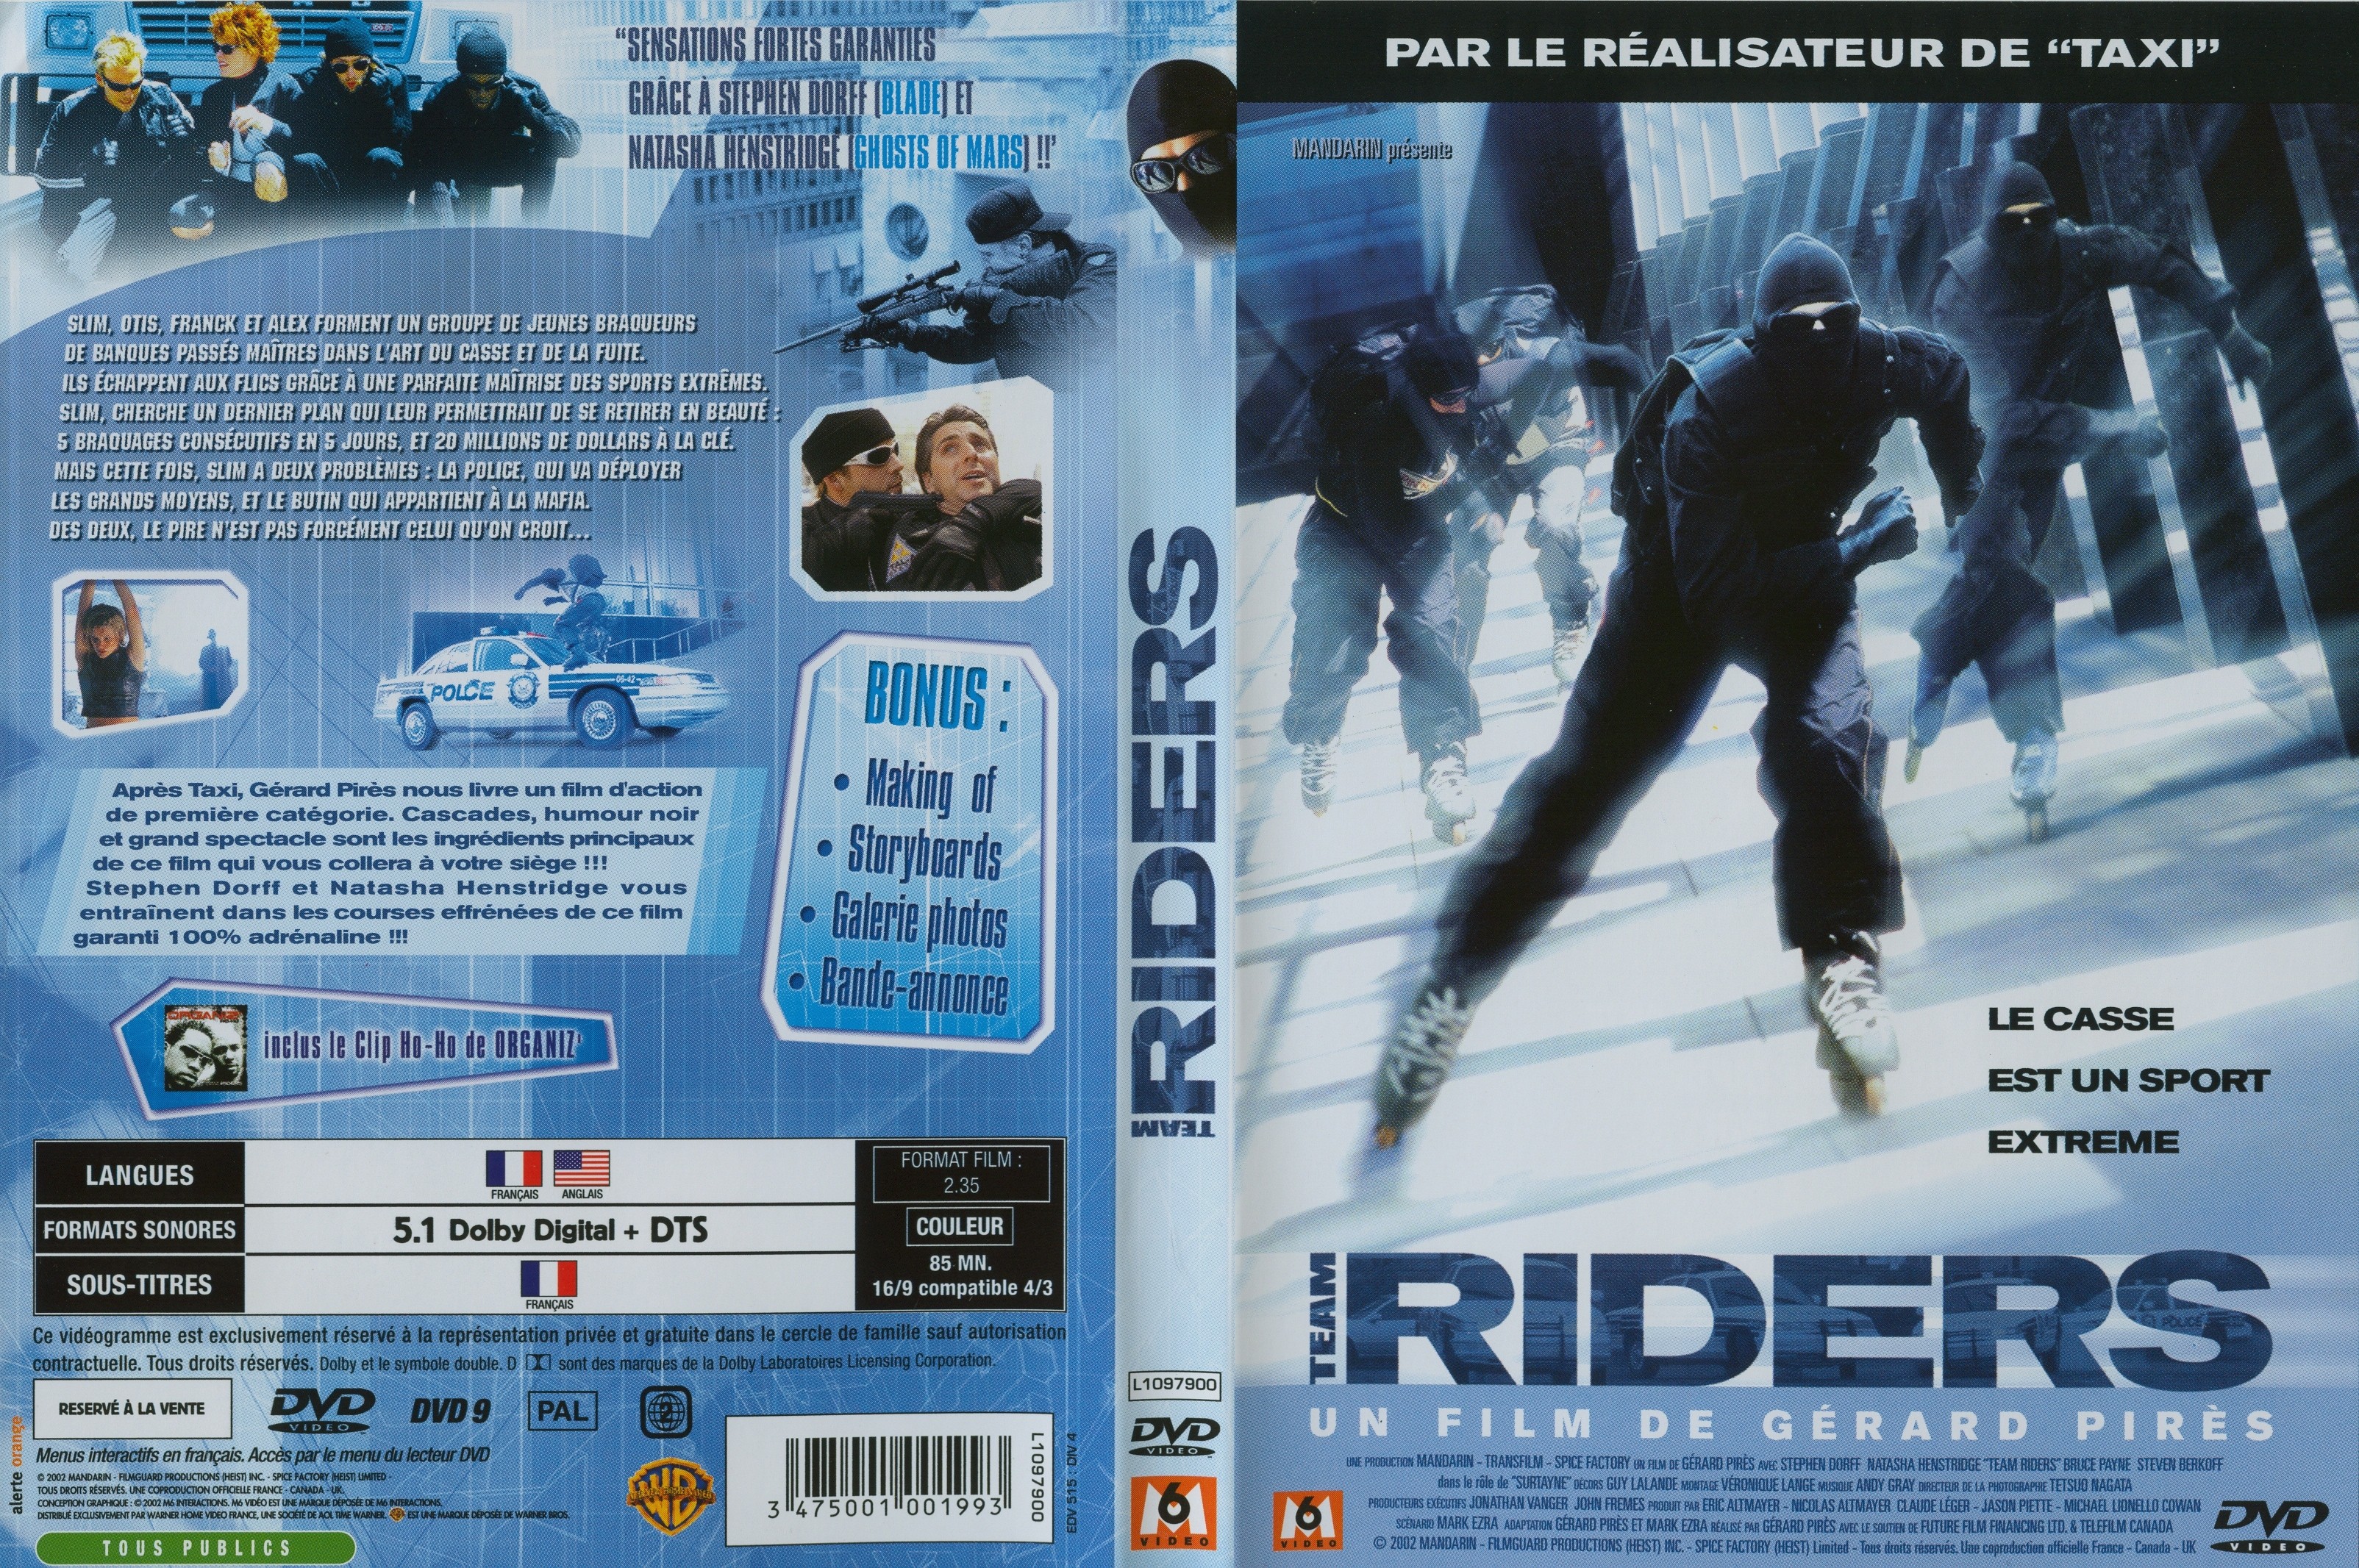 Jaquette DVD Riders